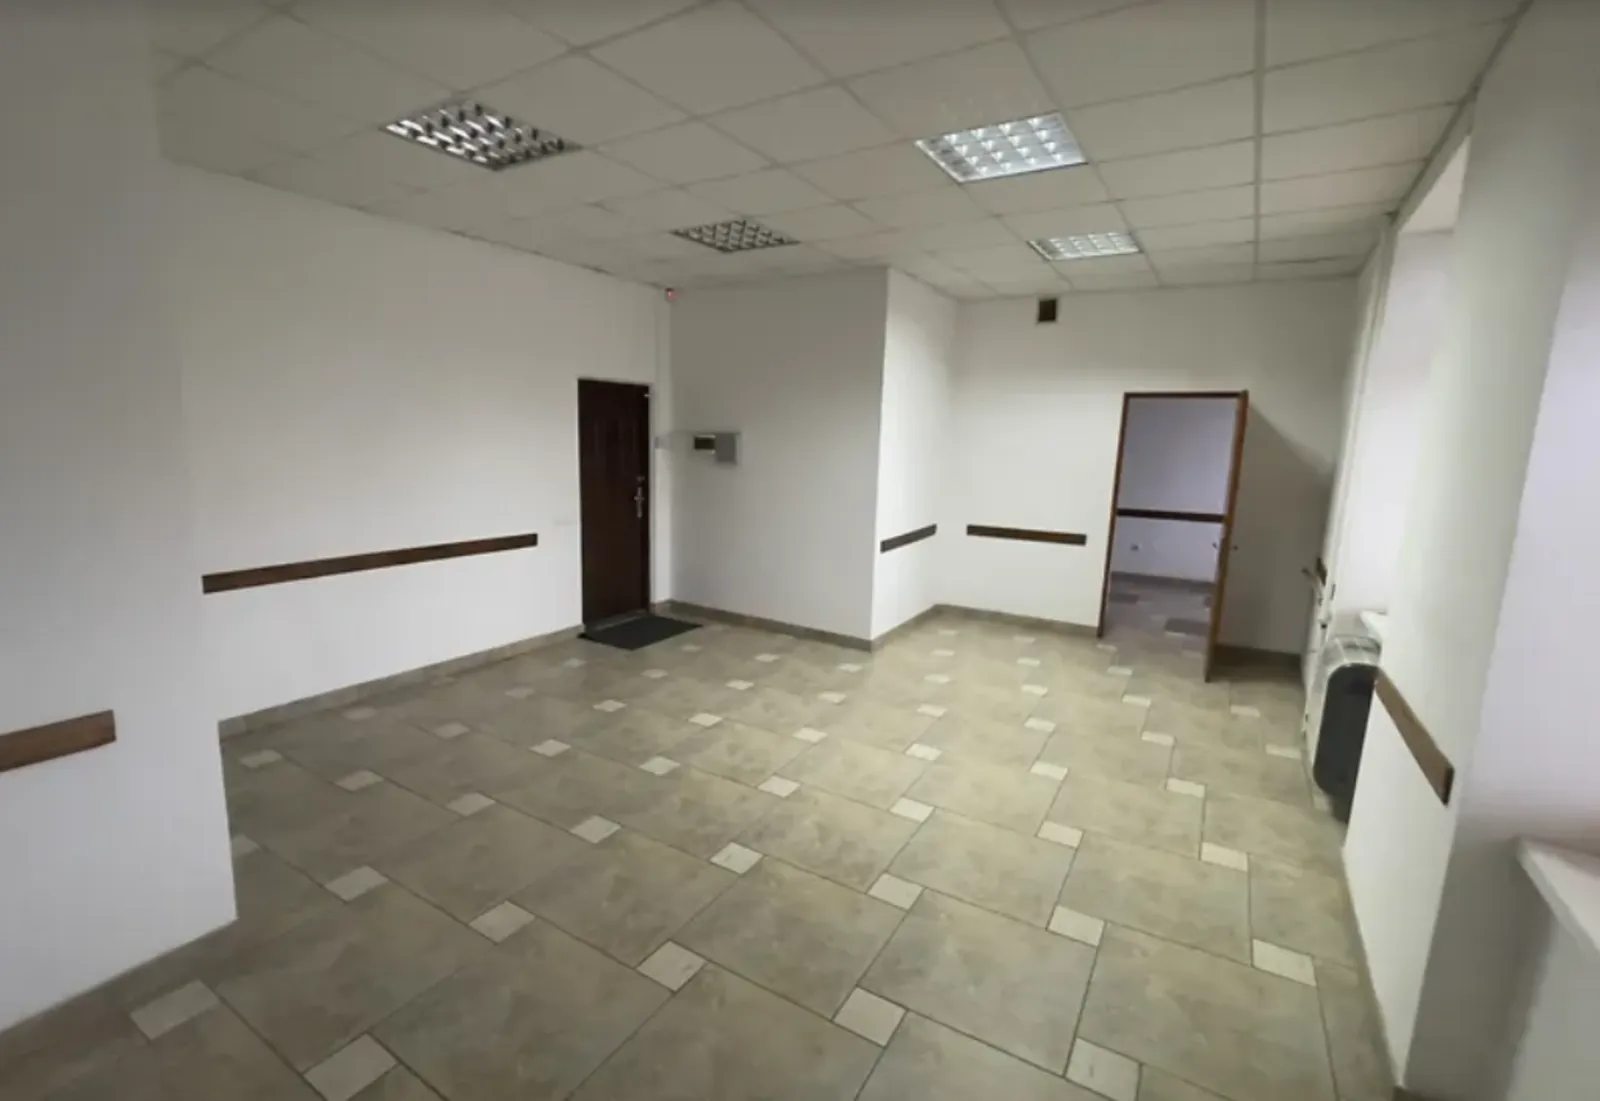 Real estate for sale for commercial purposes. 45 m², 4th floor/9 floors. Tsentr, Ternopil. 